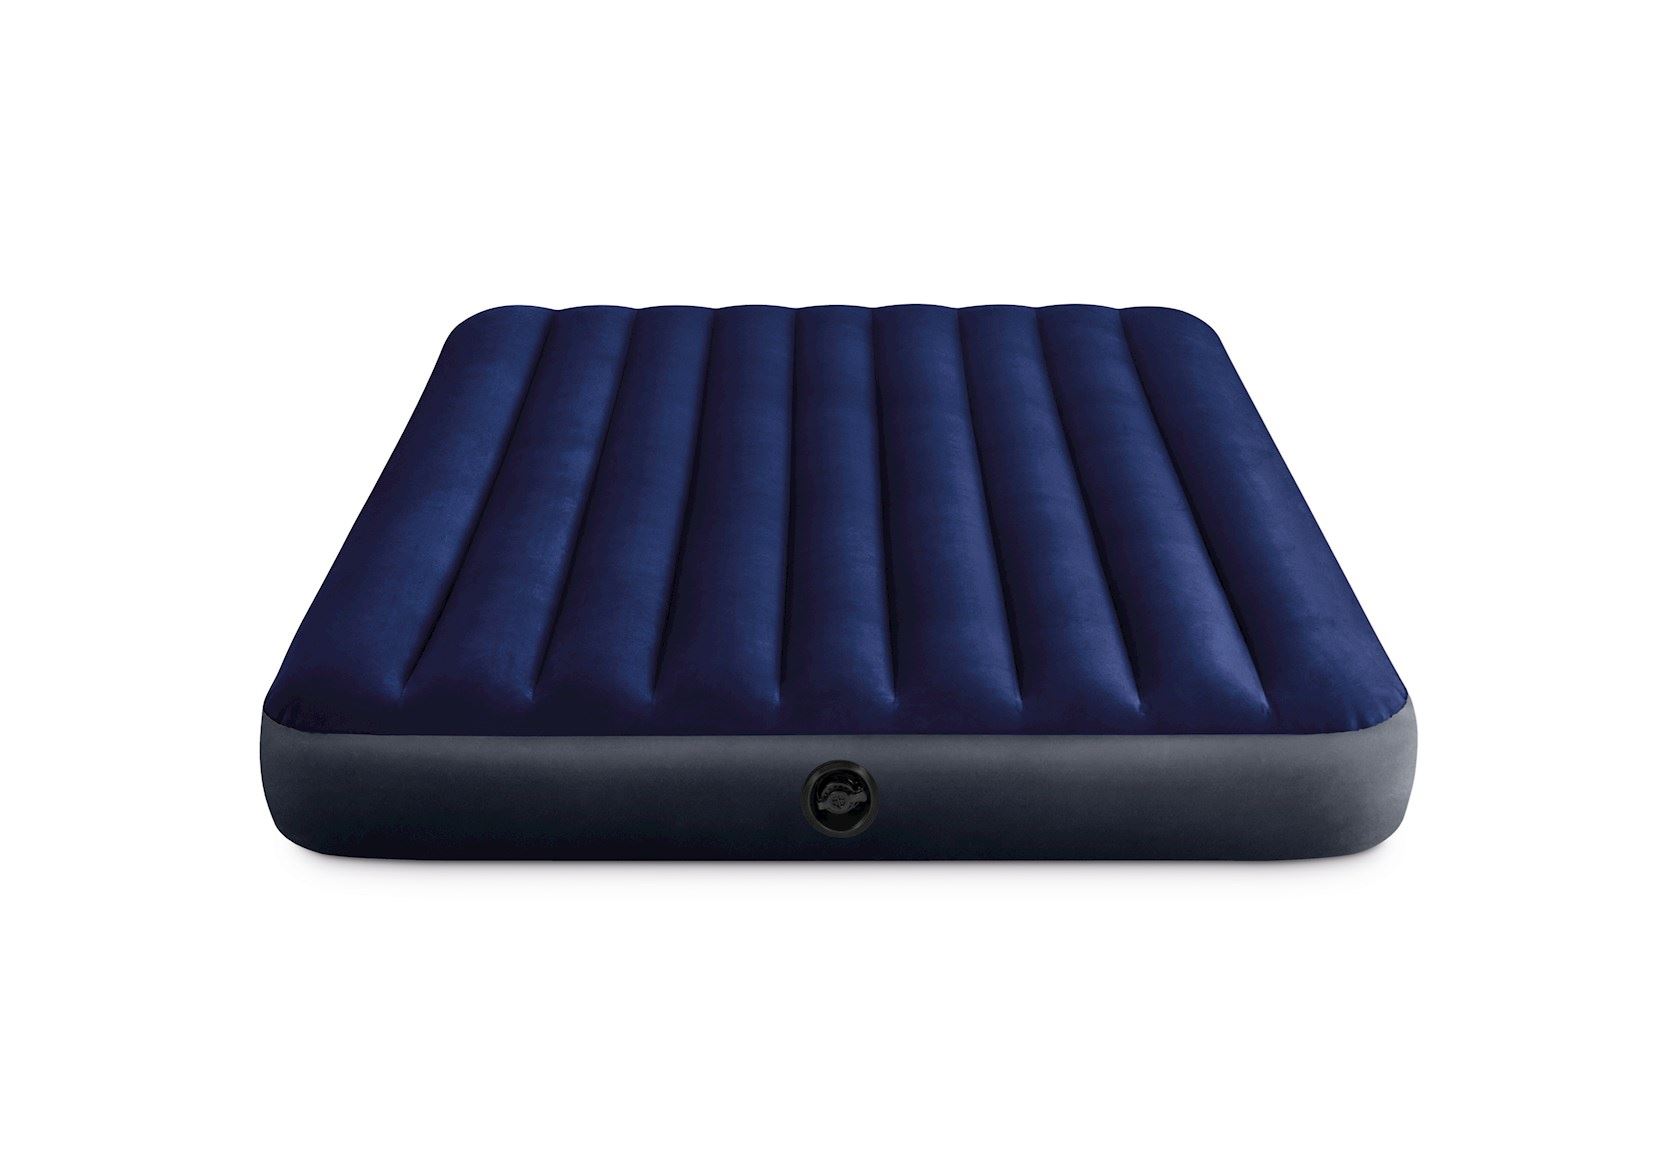 queen-dura-beam-classic-downy-airbed-w-hand-pump